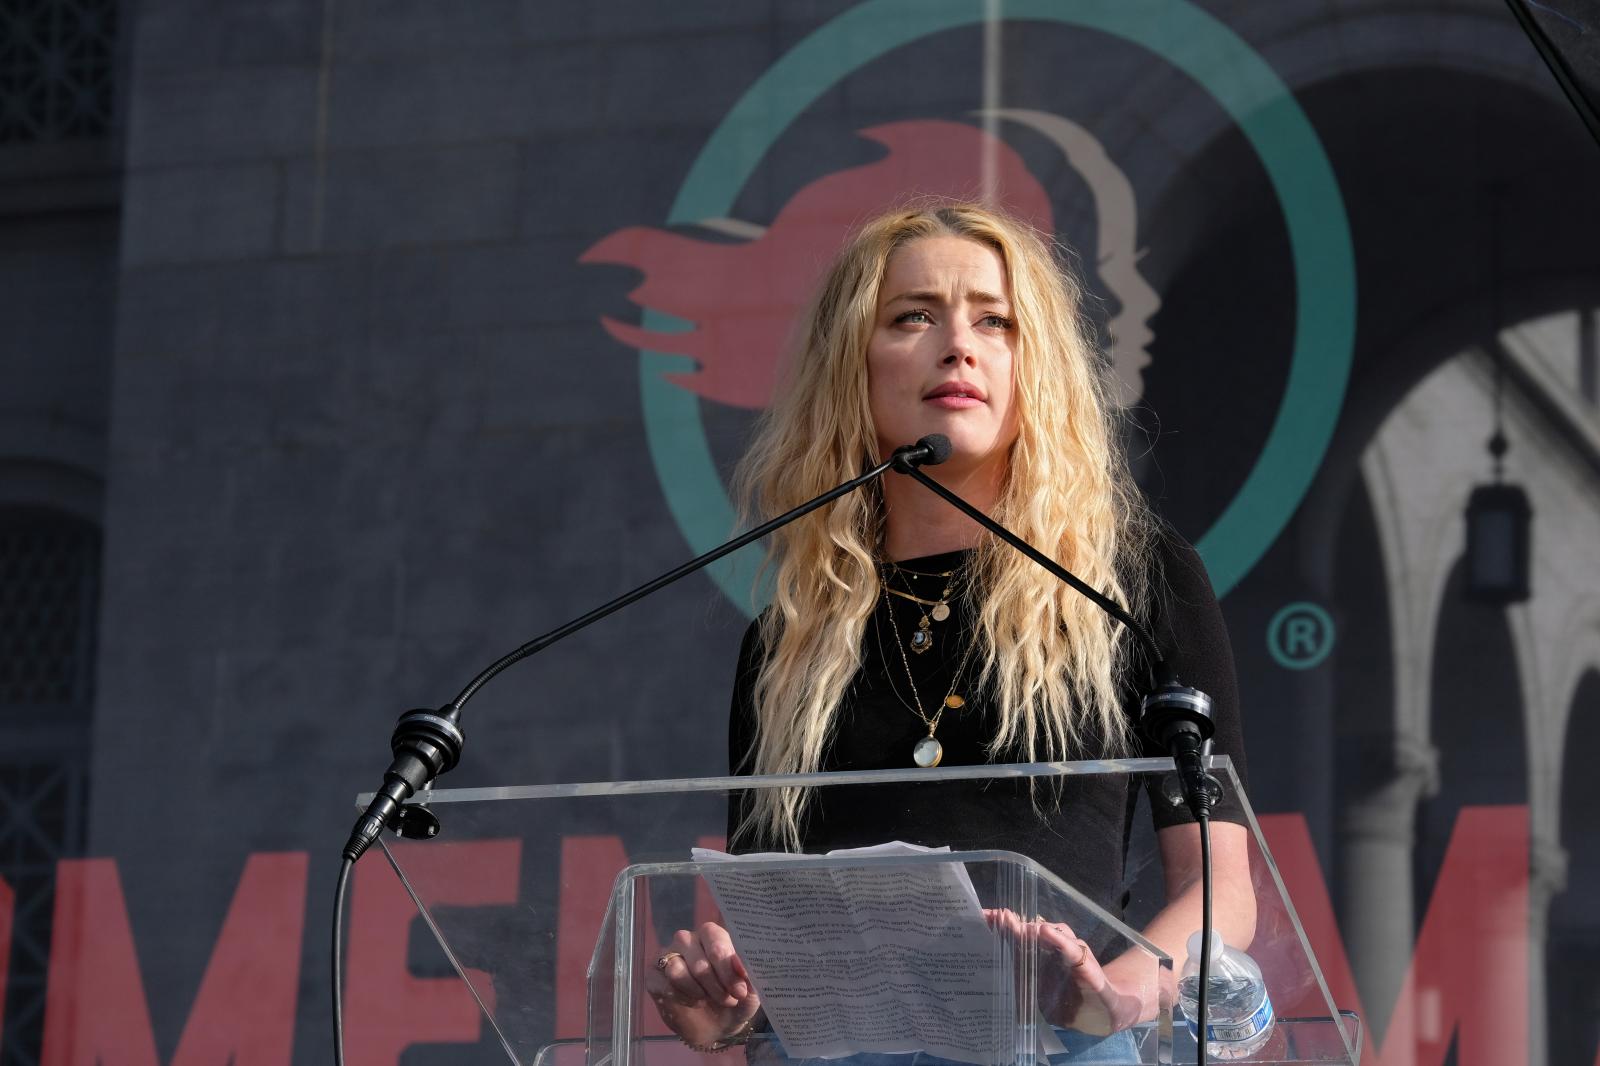 Image from REPORTAGE - LOS ANGELES, CALIFORNIA - JANUARY 18: Actress Amber Heard...